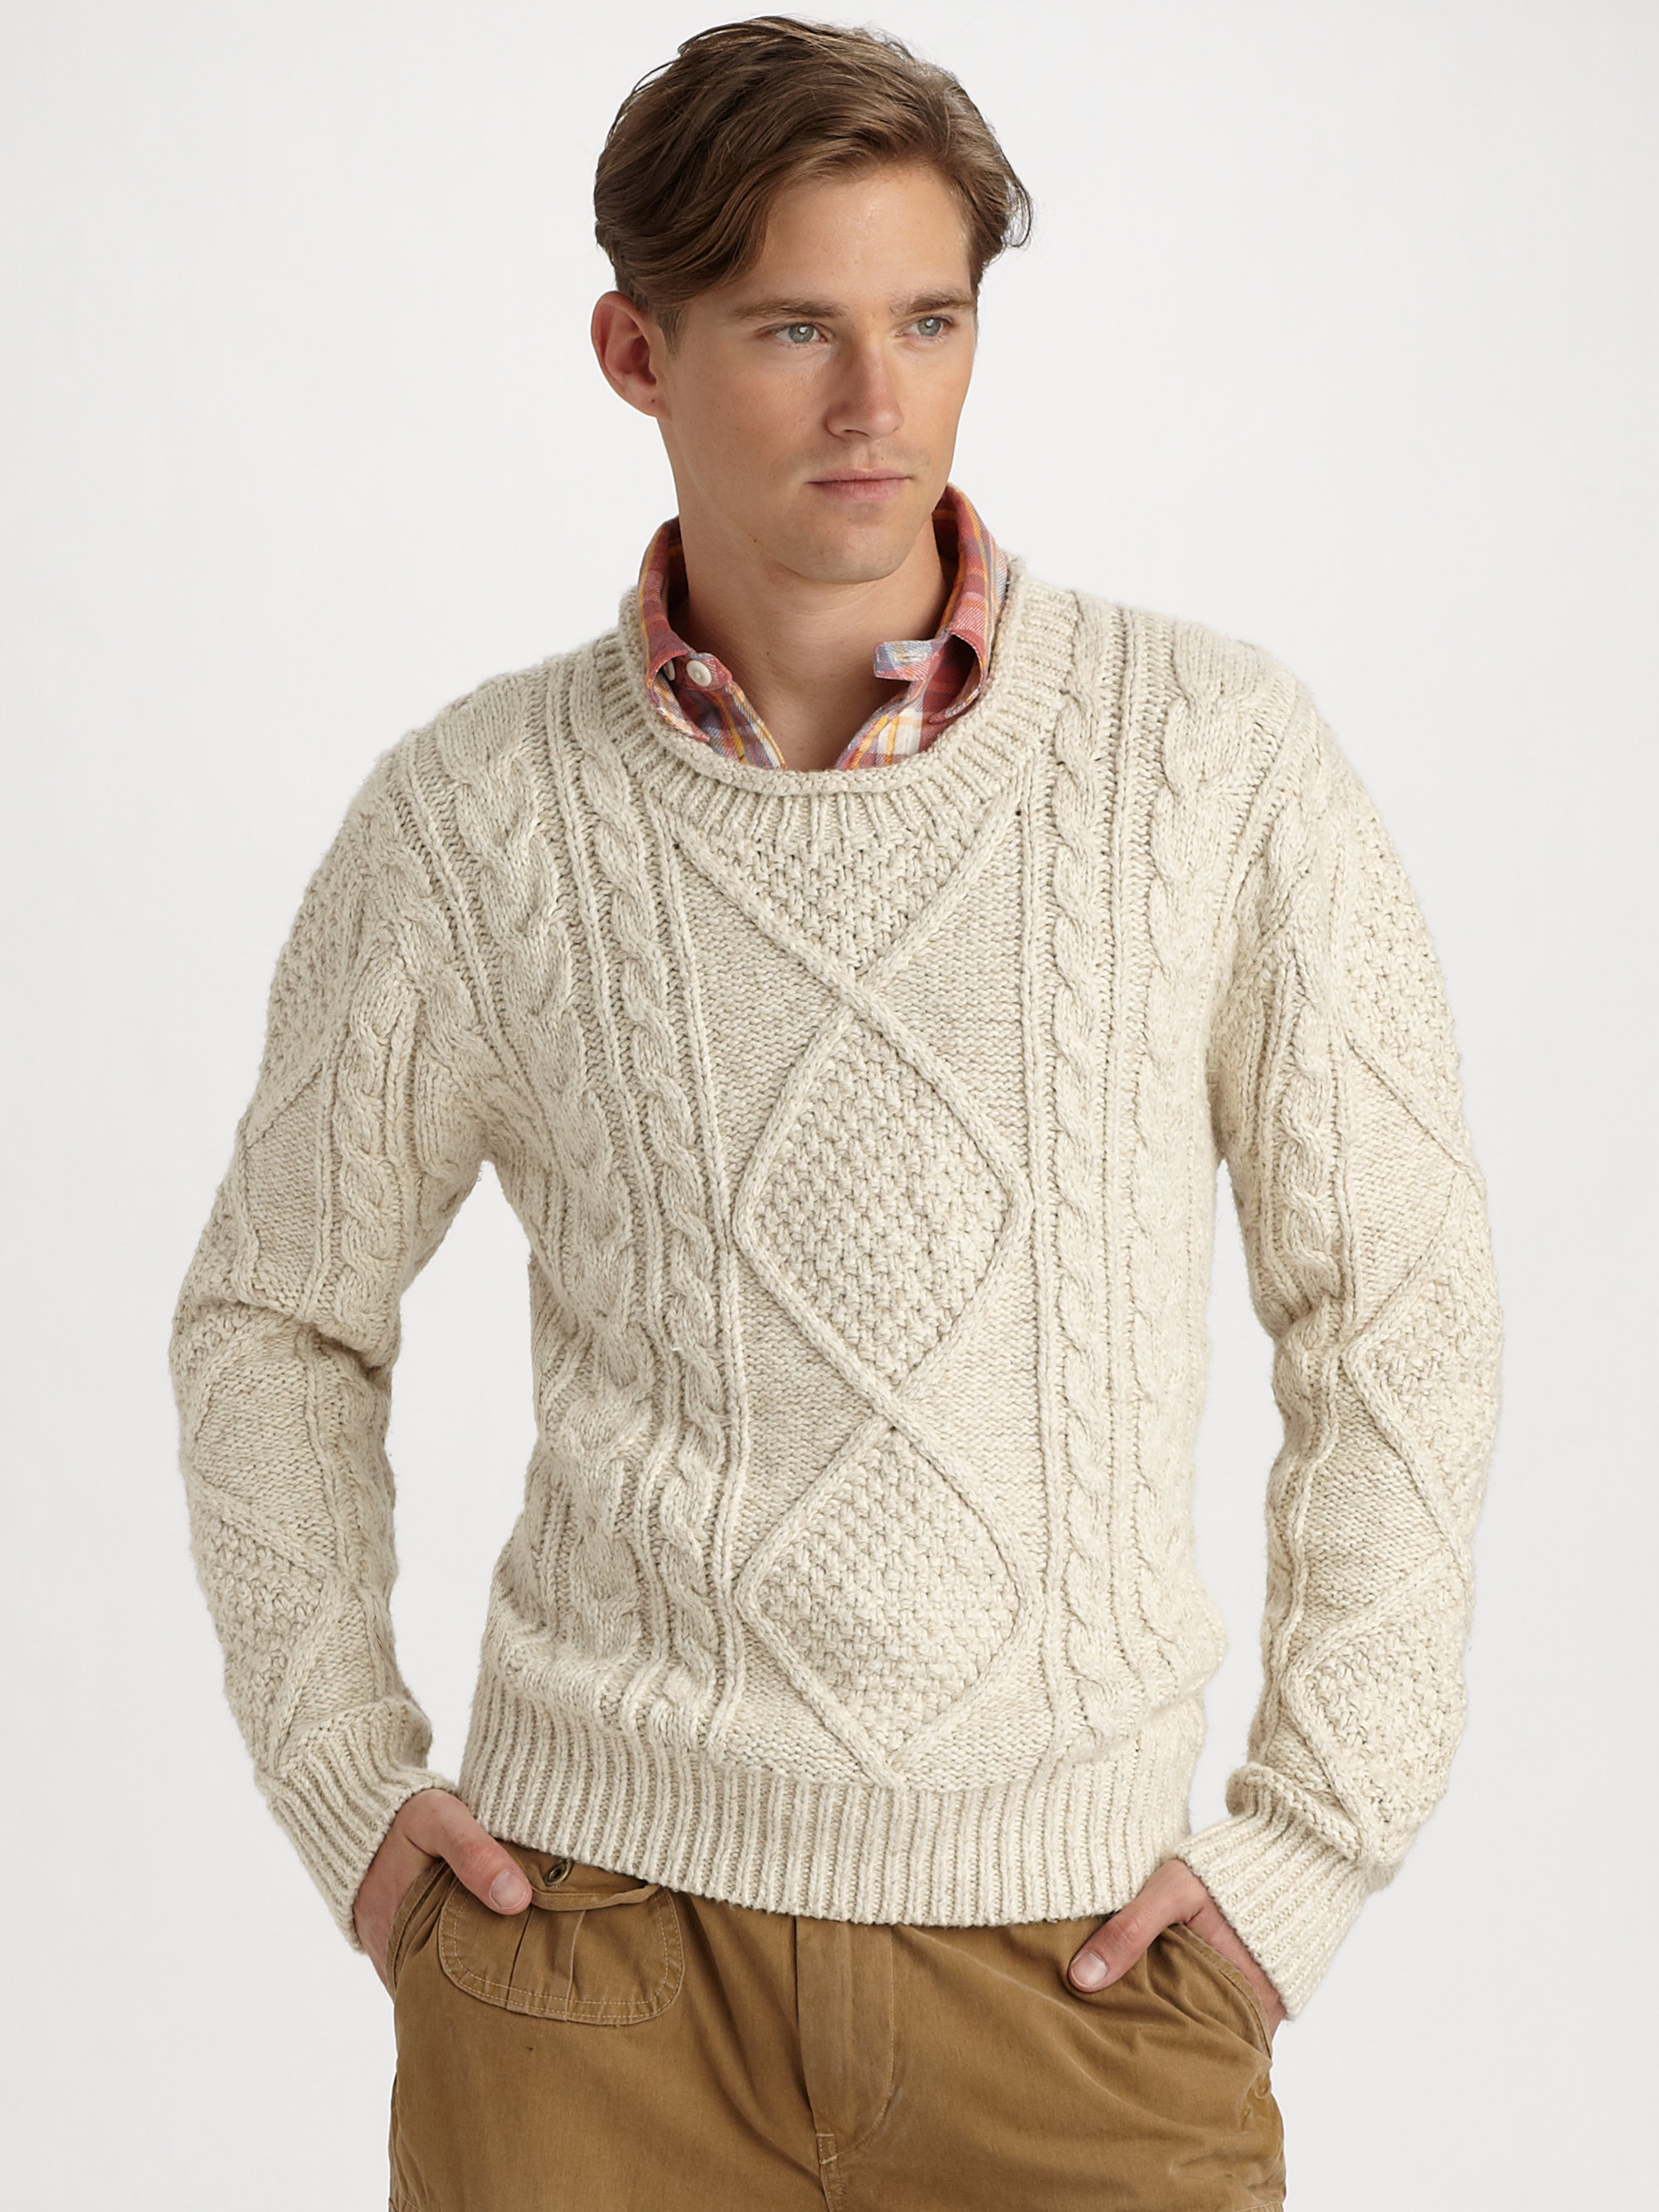 Polo ralph lauren Cableknit Rollneck Sweater in Natural for Men | Lyst